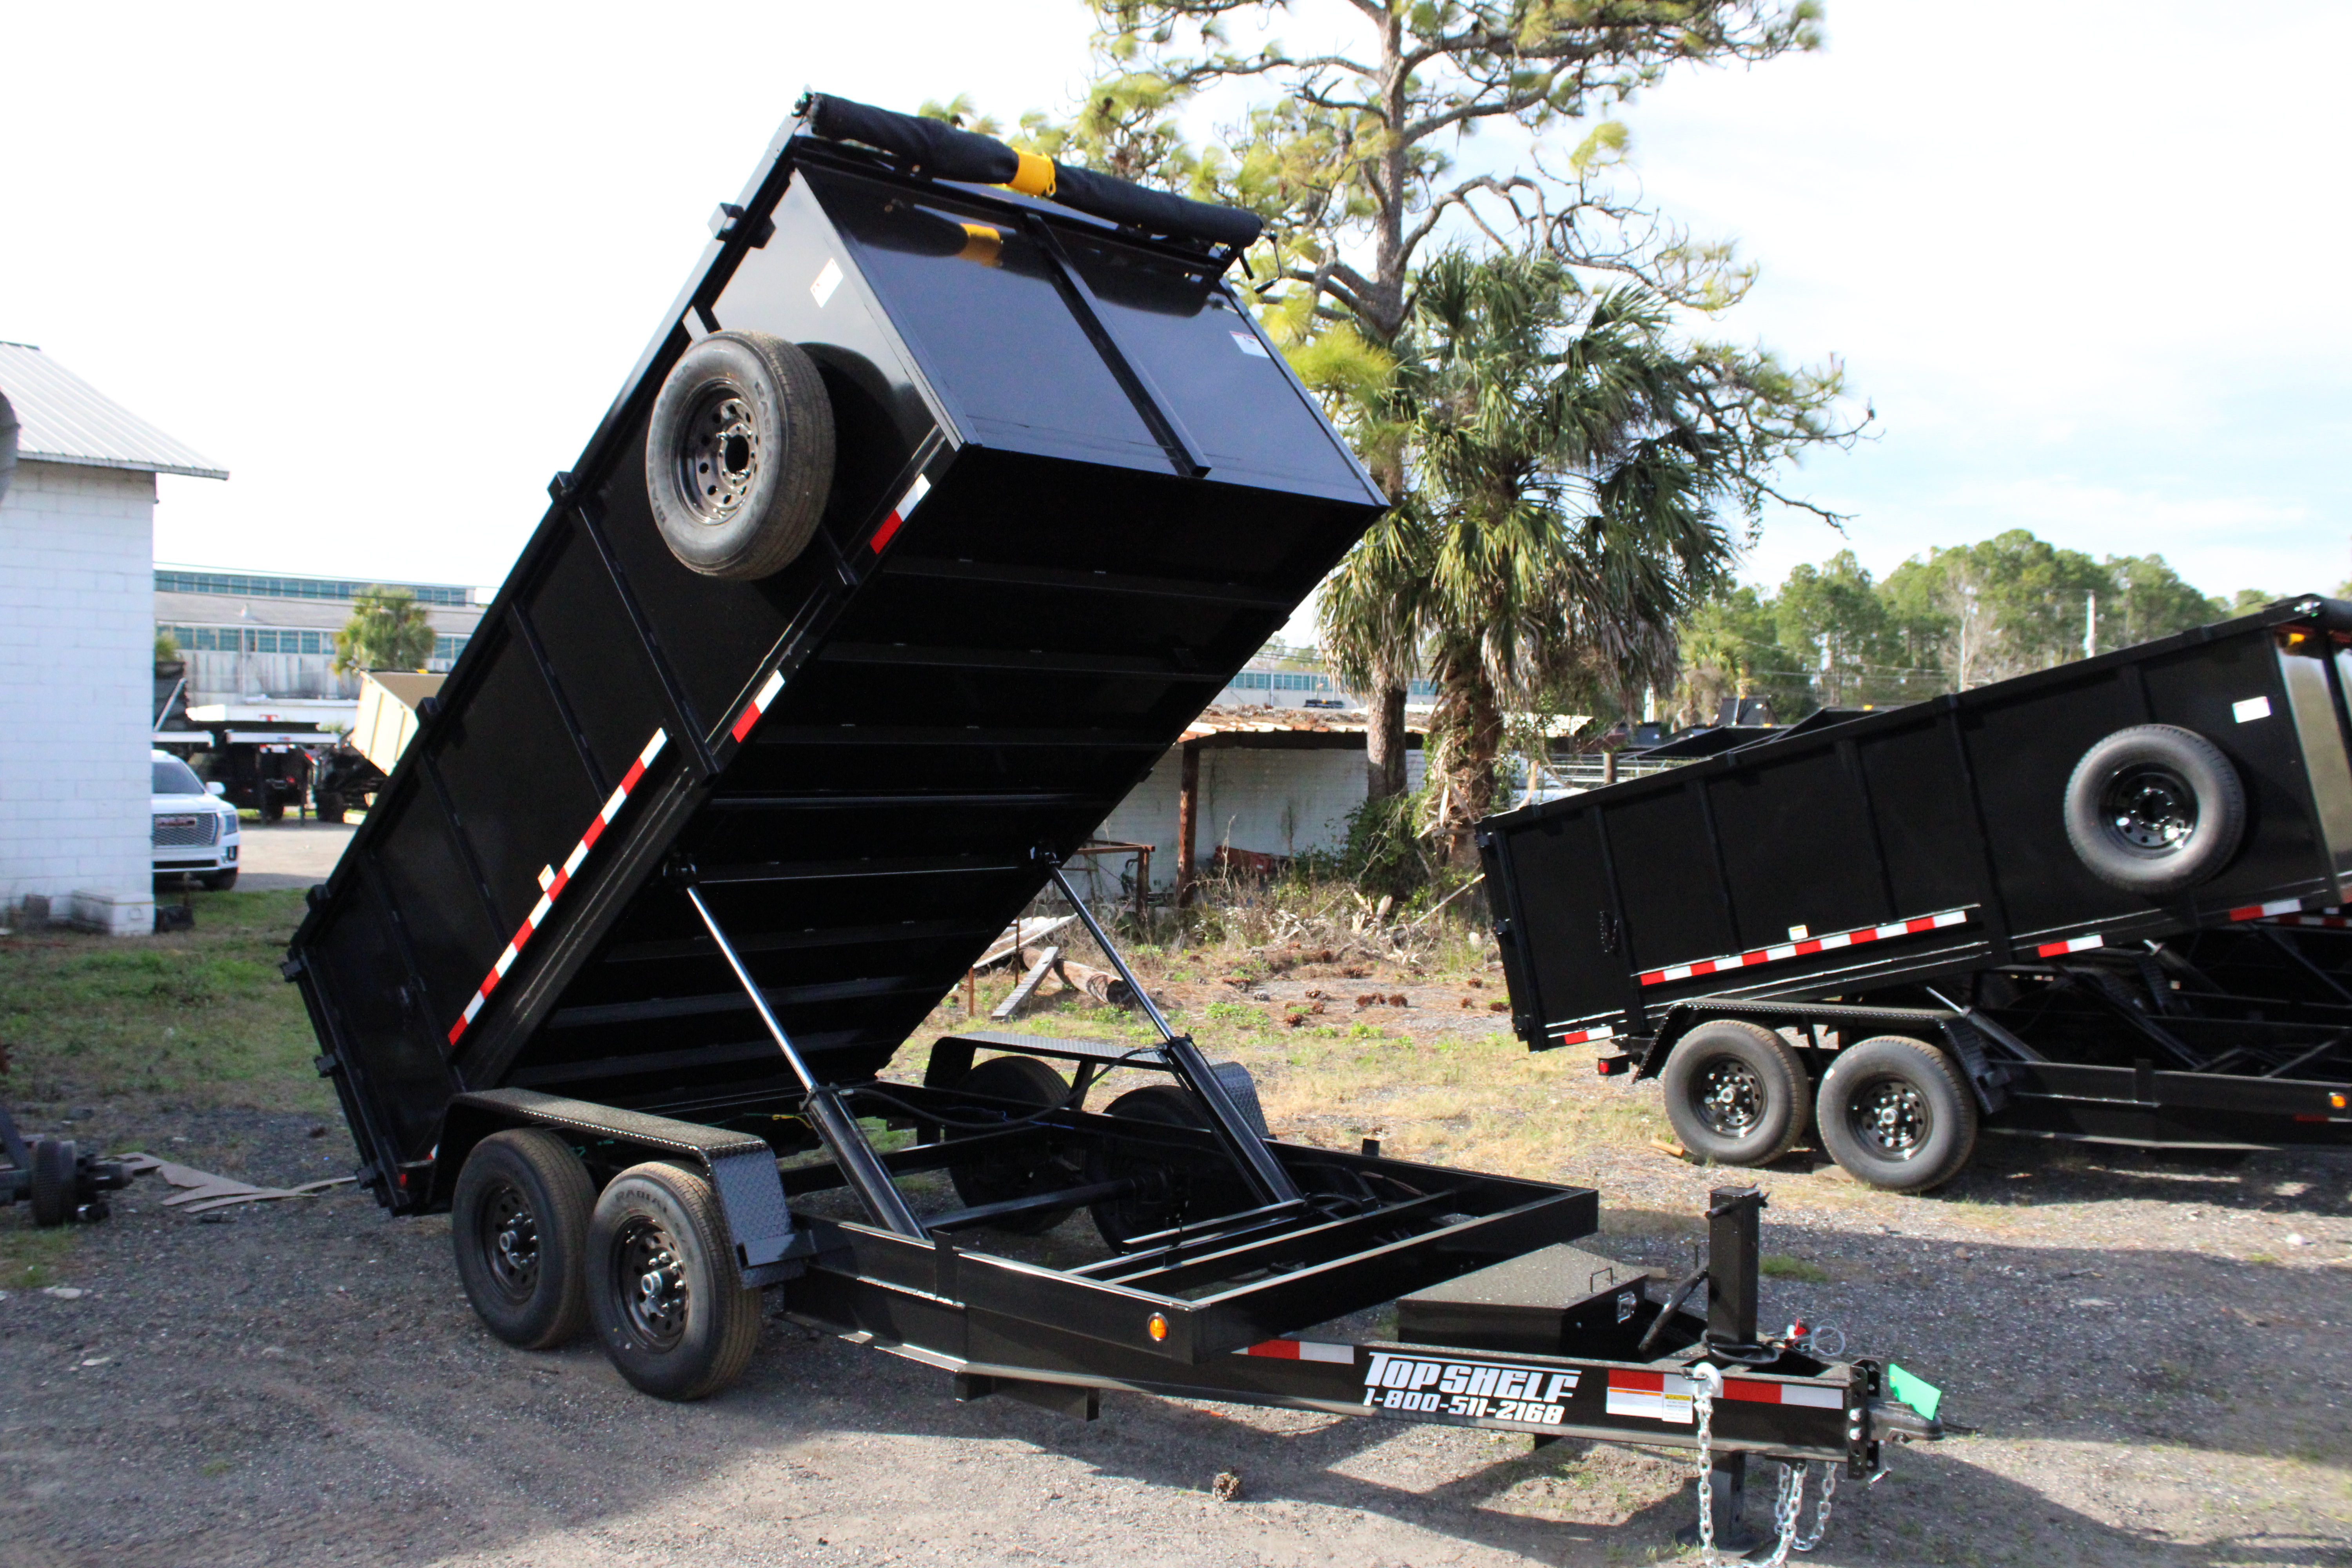 A fully loaded hydraulic dump trailer in action, efficiently unloading materials.